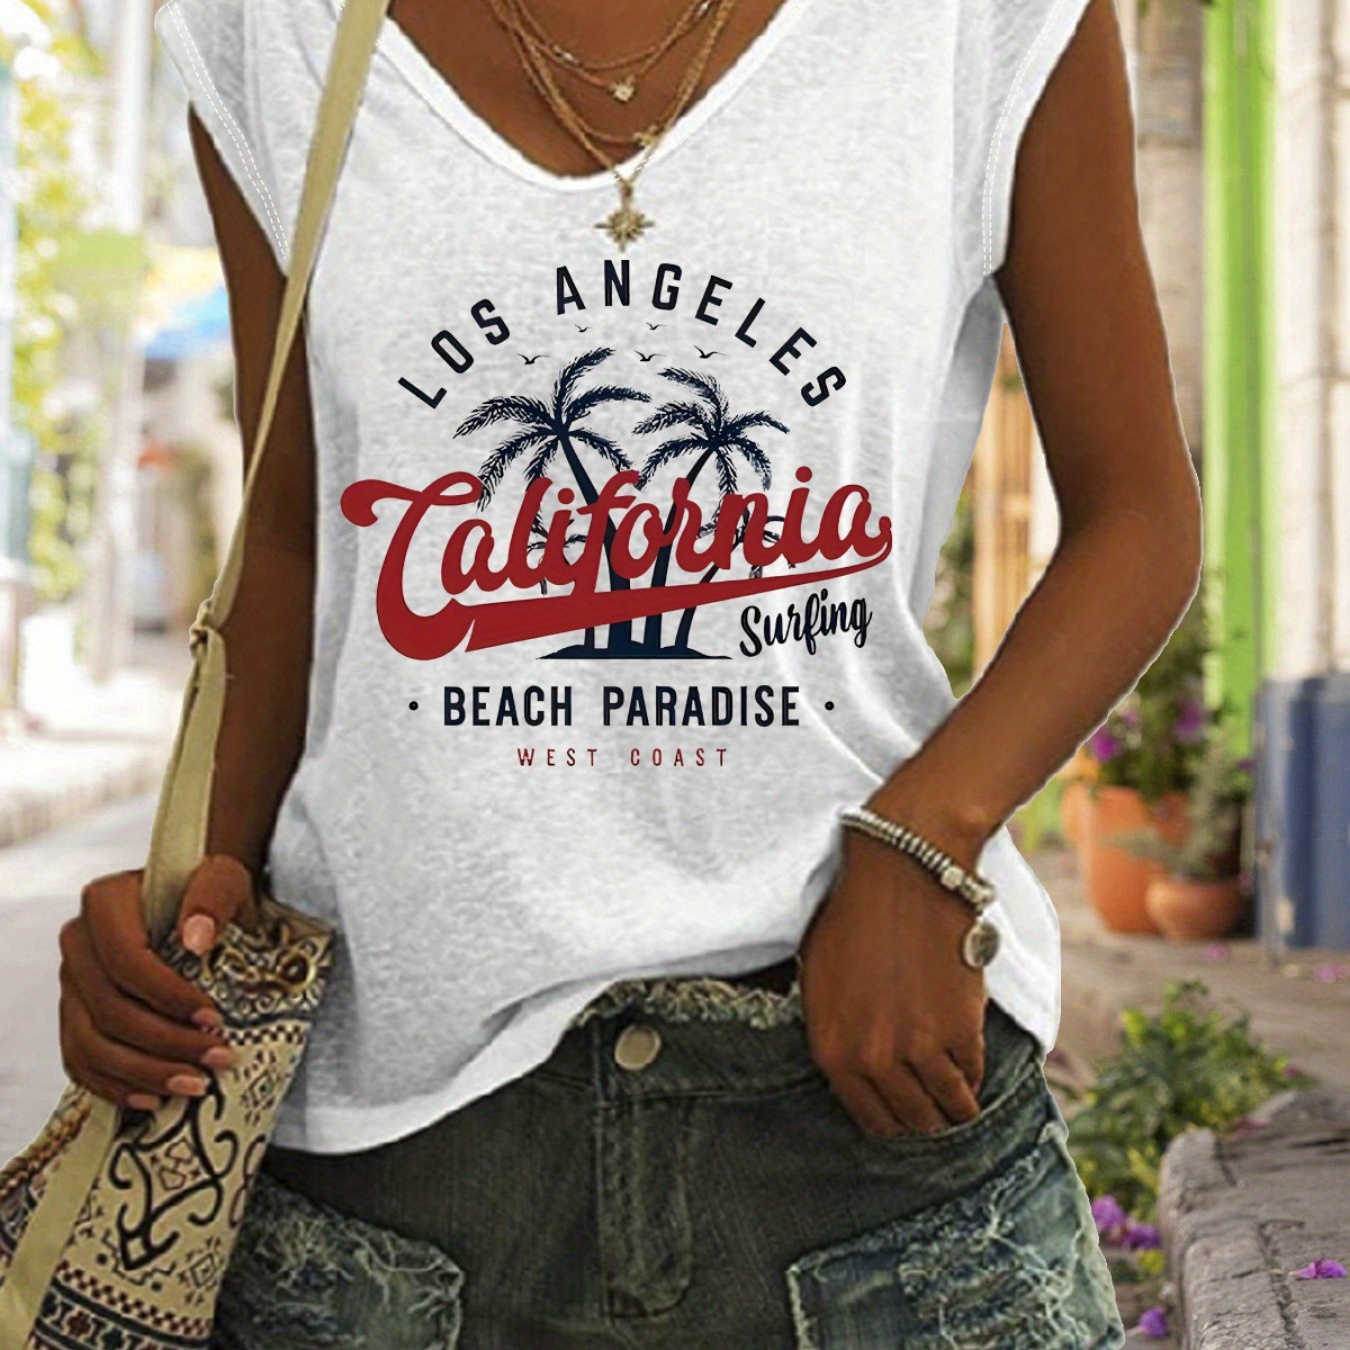 

California Letter & Tree Print Tank Top, Cap Sleeve Casual Top For Summer & Spring, Women's Clothing